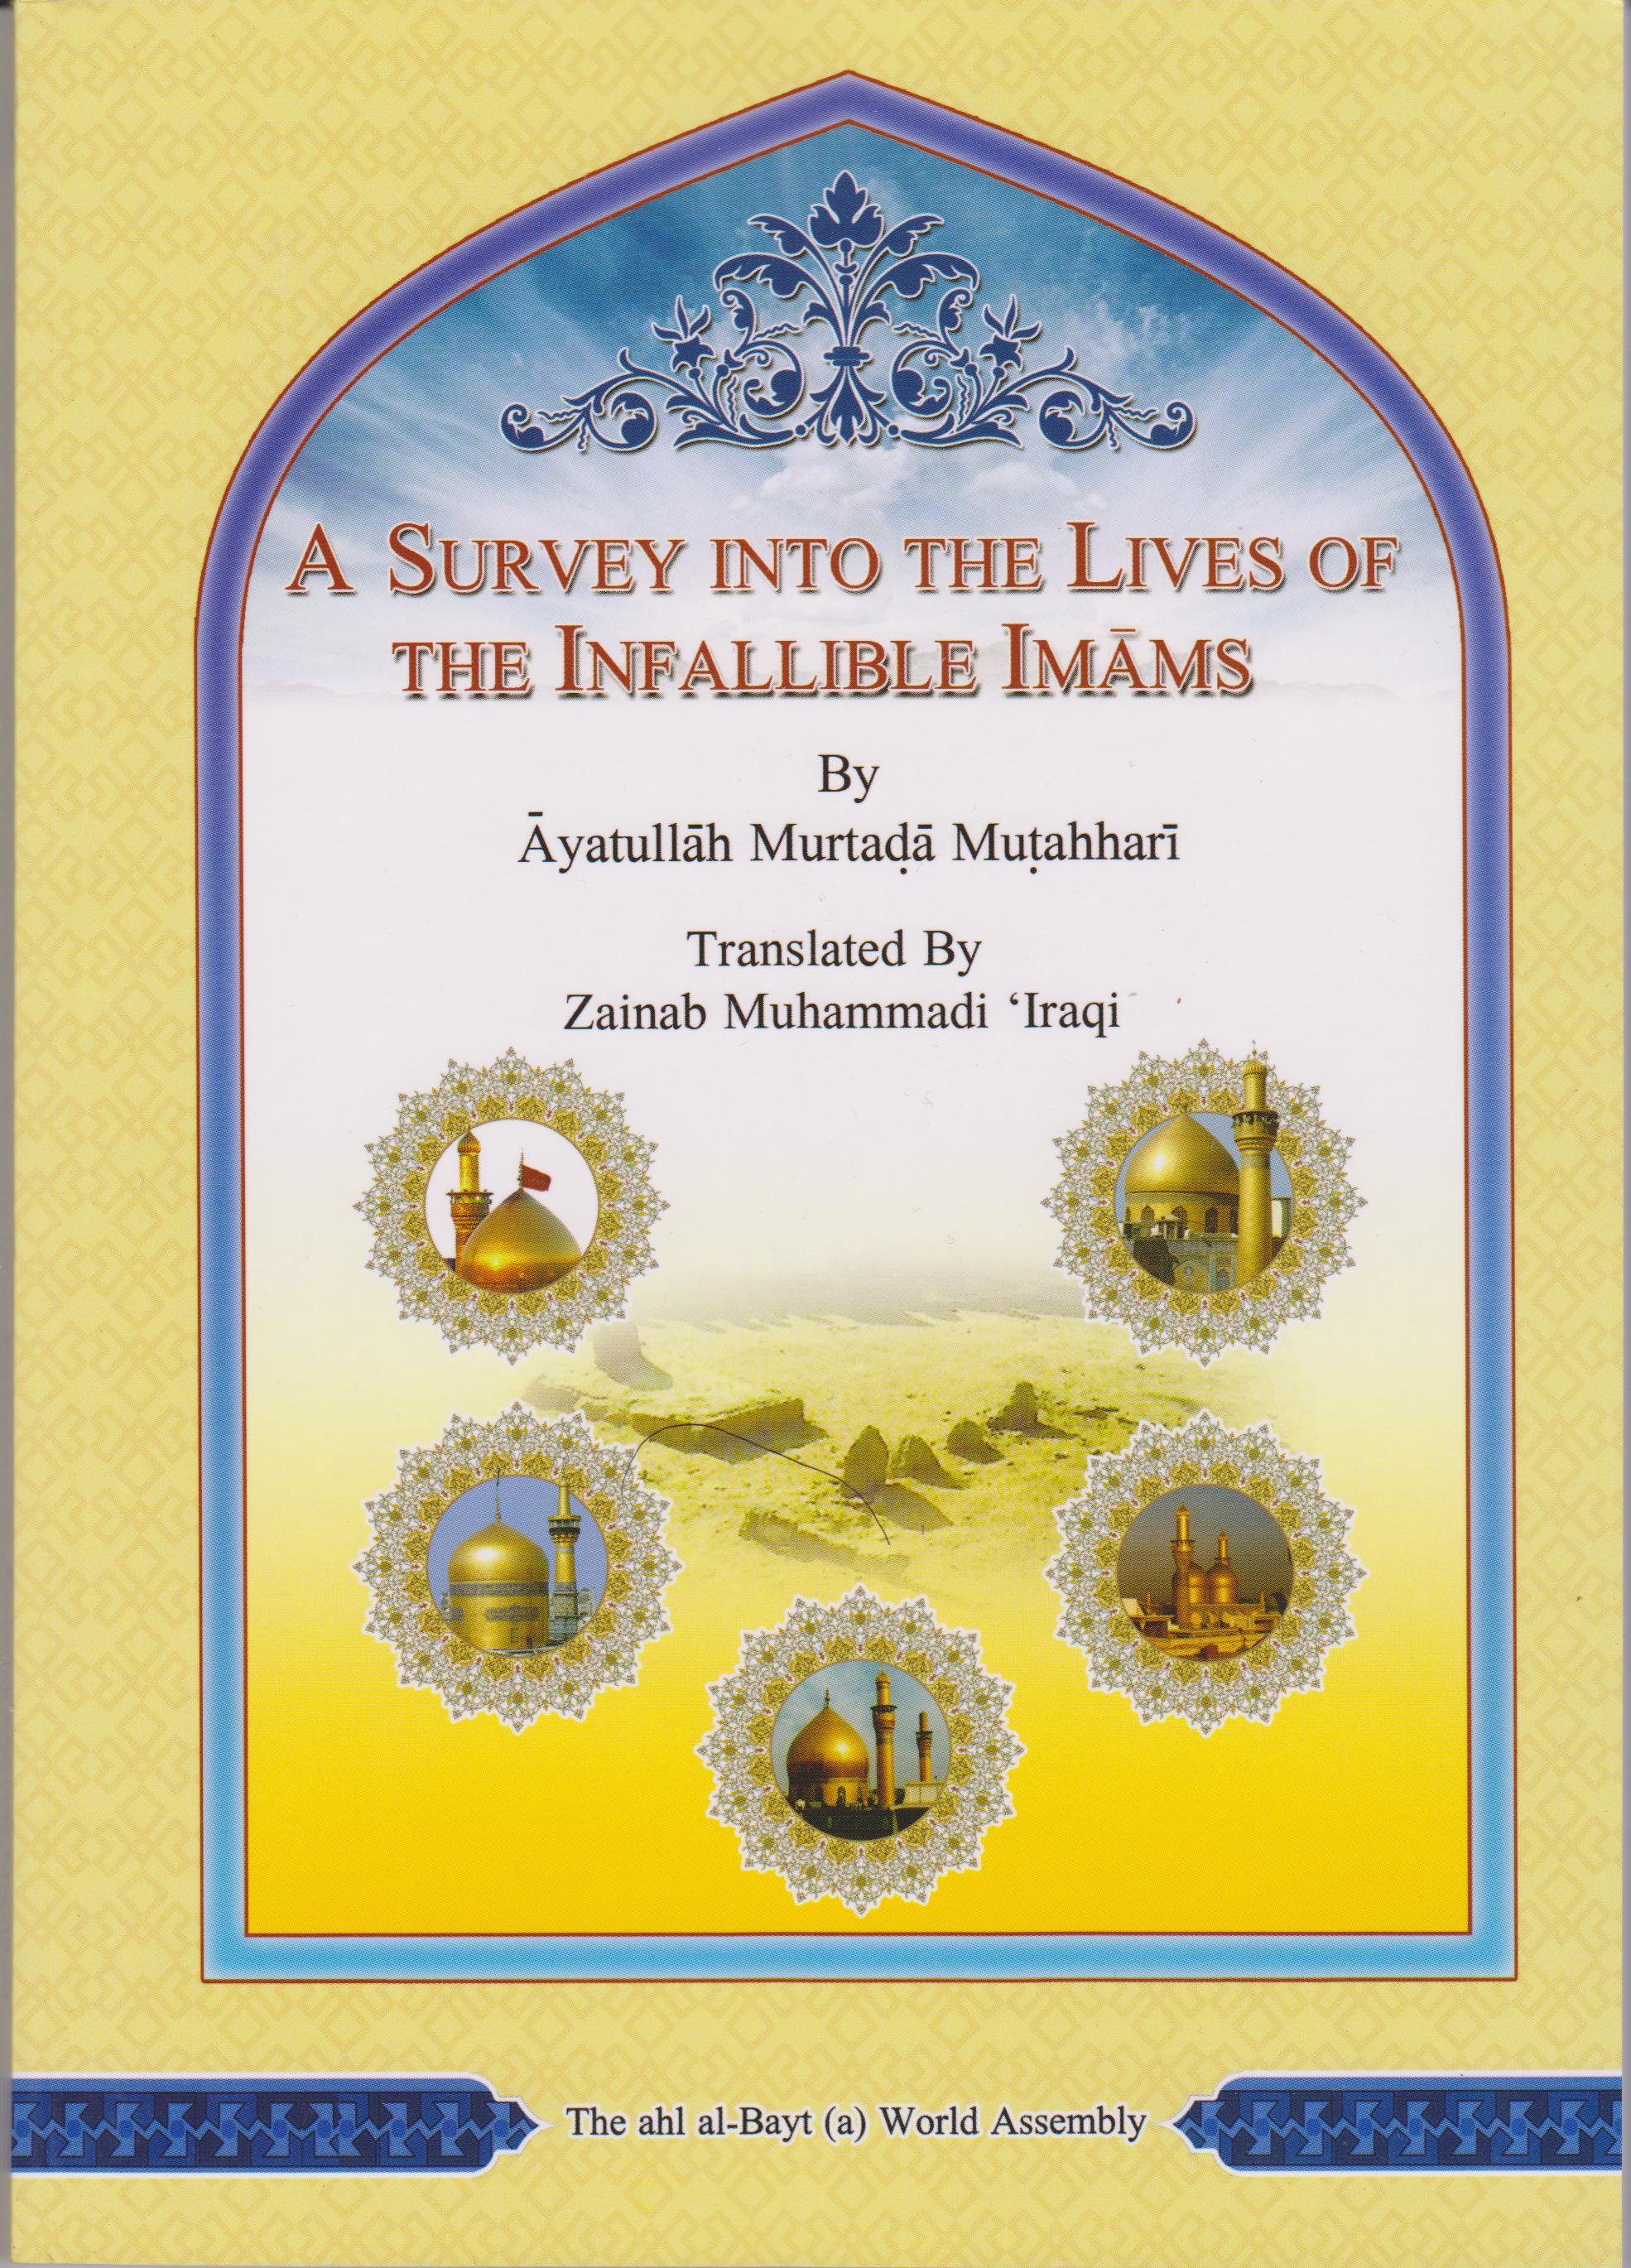 A Survey into the lives of the Infallible Imams